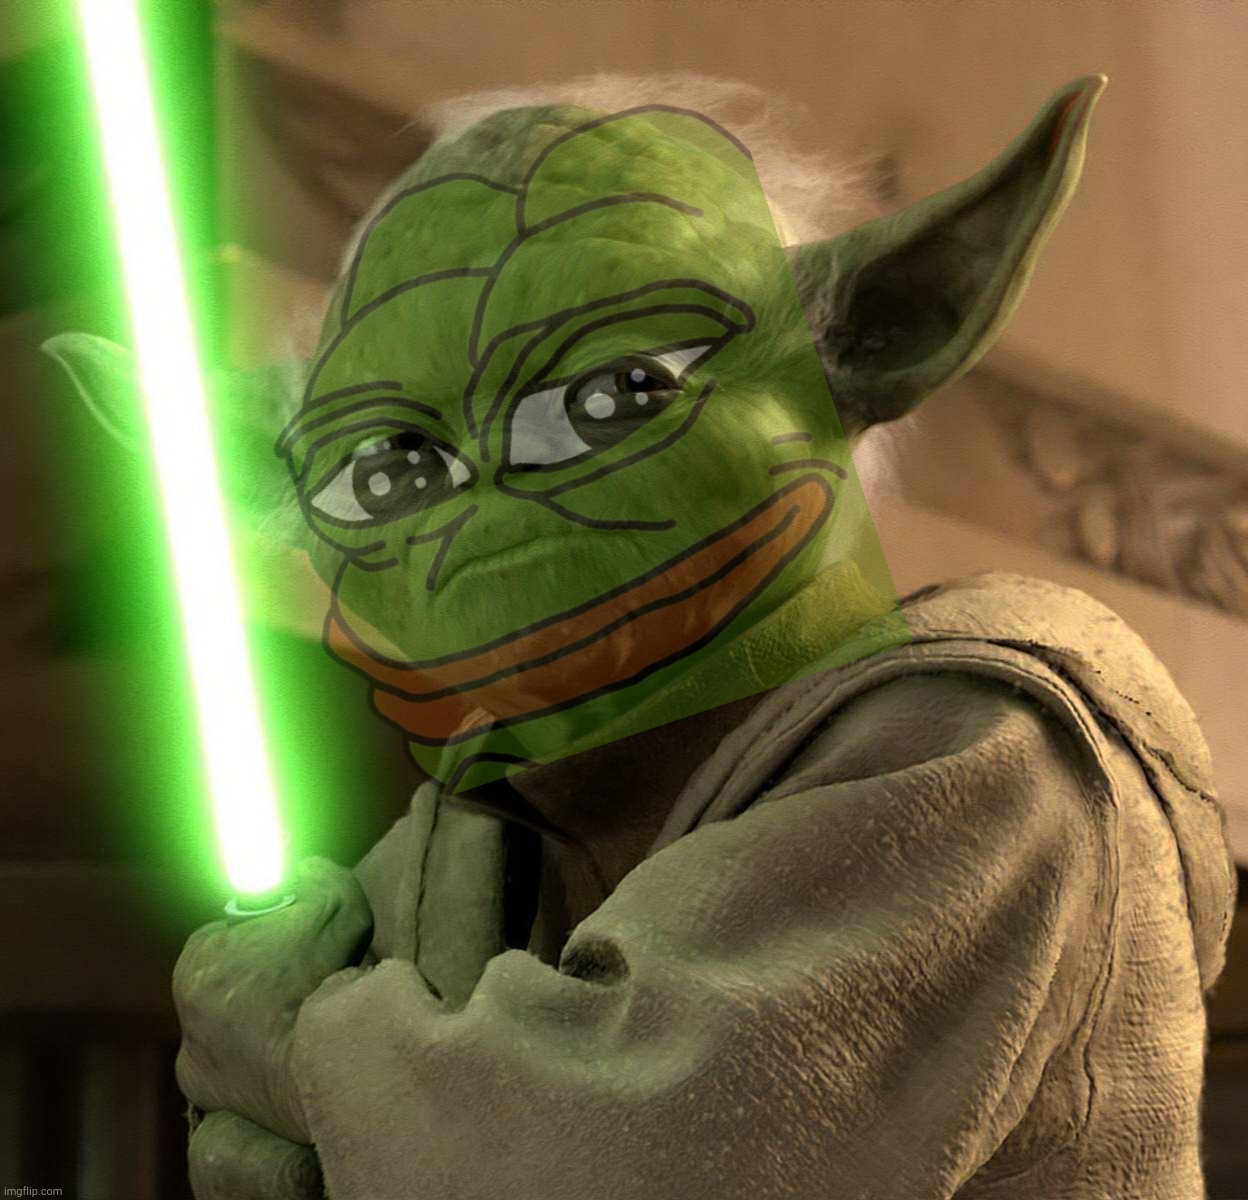 Pepe Party gonna party up your face,,, | image tagged in yoda light saber,pepe head,pepe,pepe party,i pepe the fool,crossover templates | made w/ Imgflip meme maker